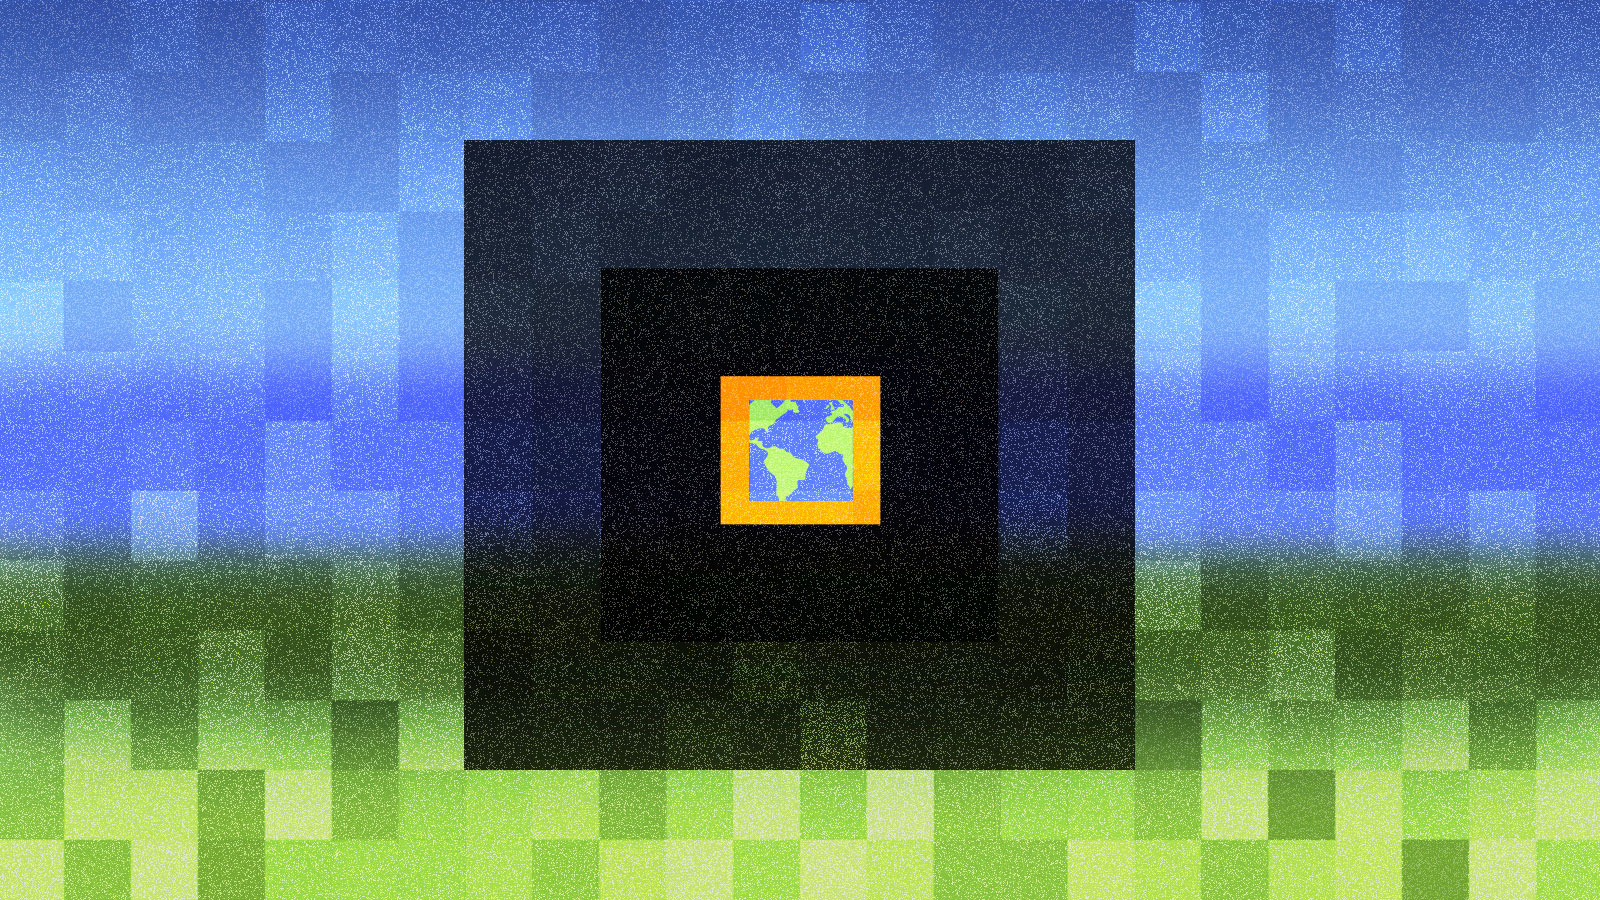 Pixelated illustration of square earth inside a black square